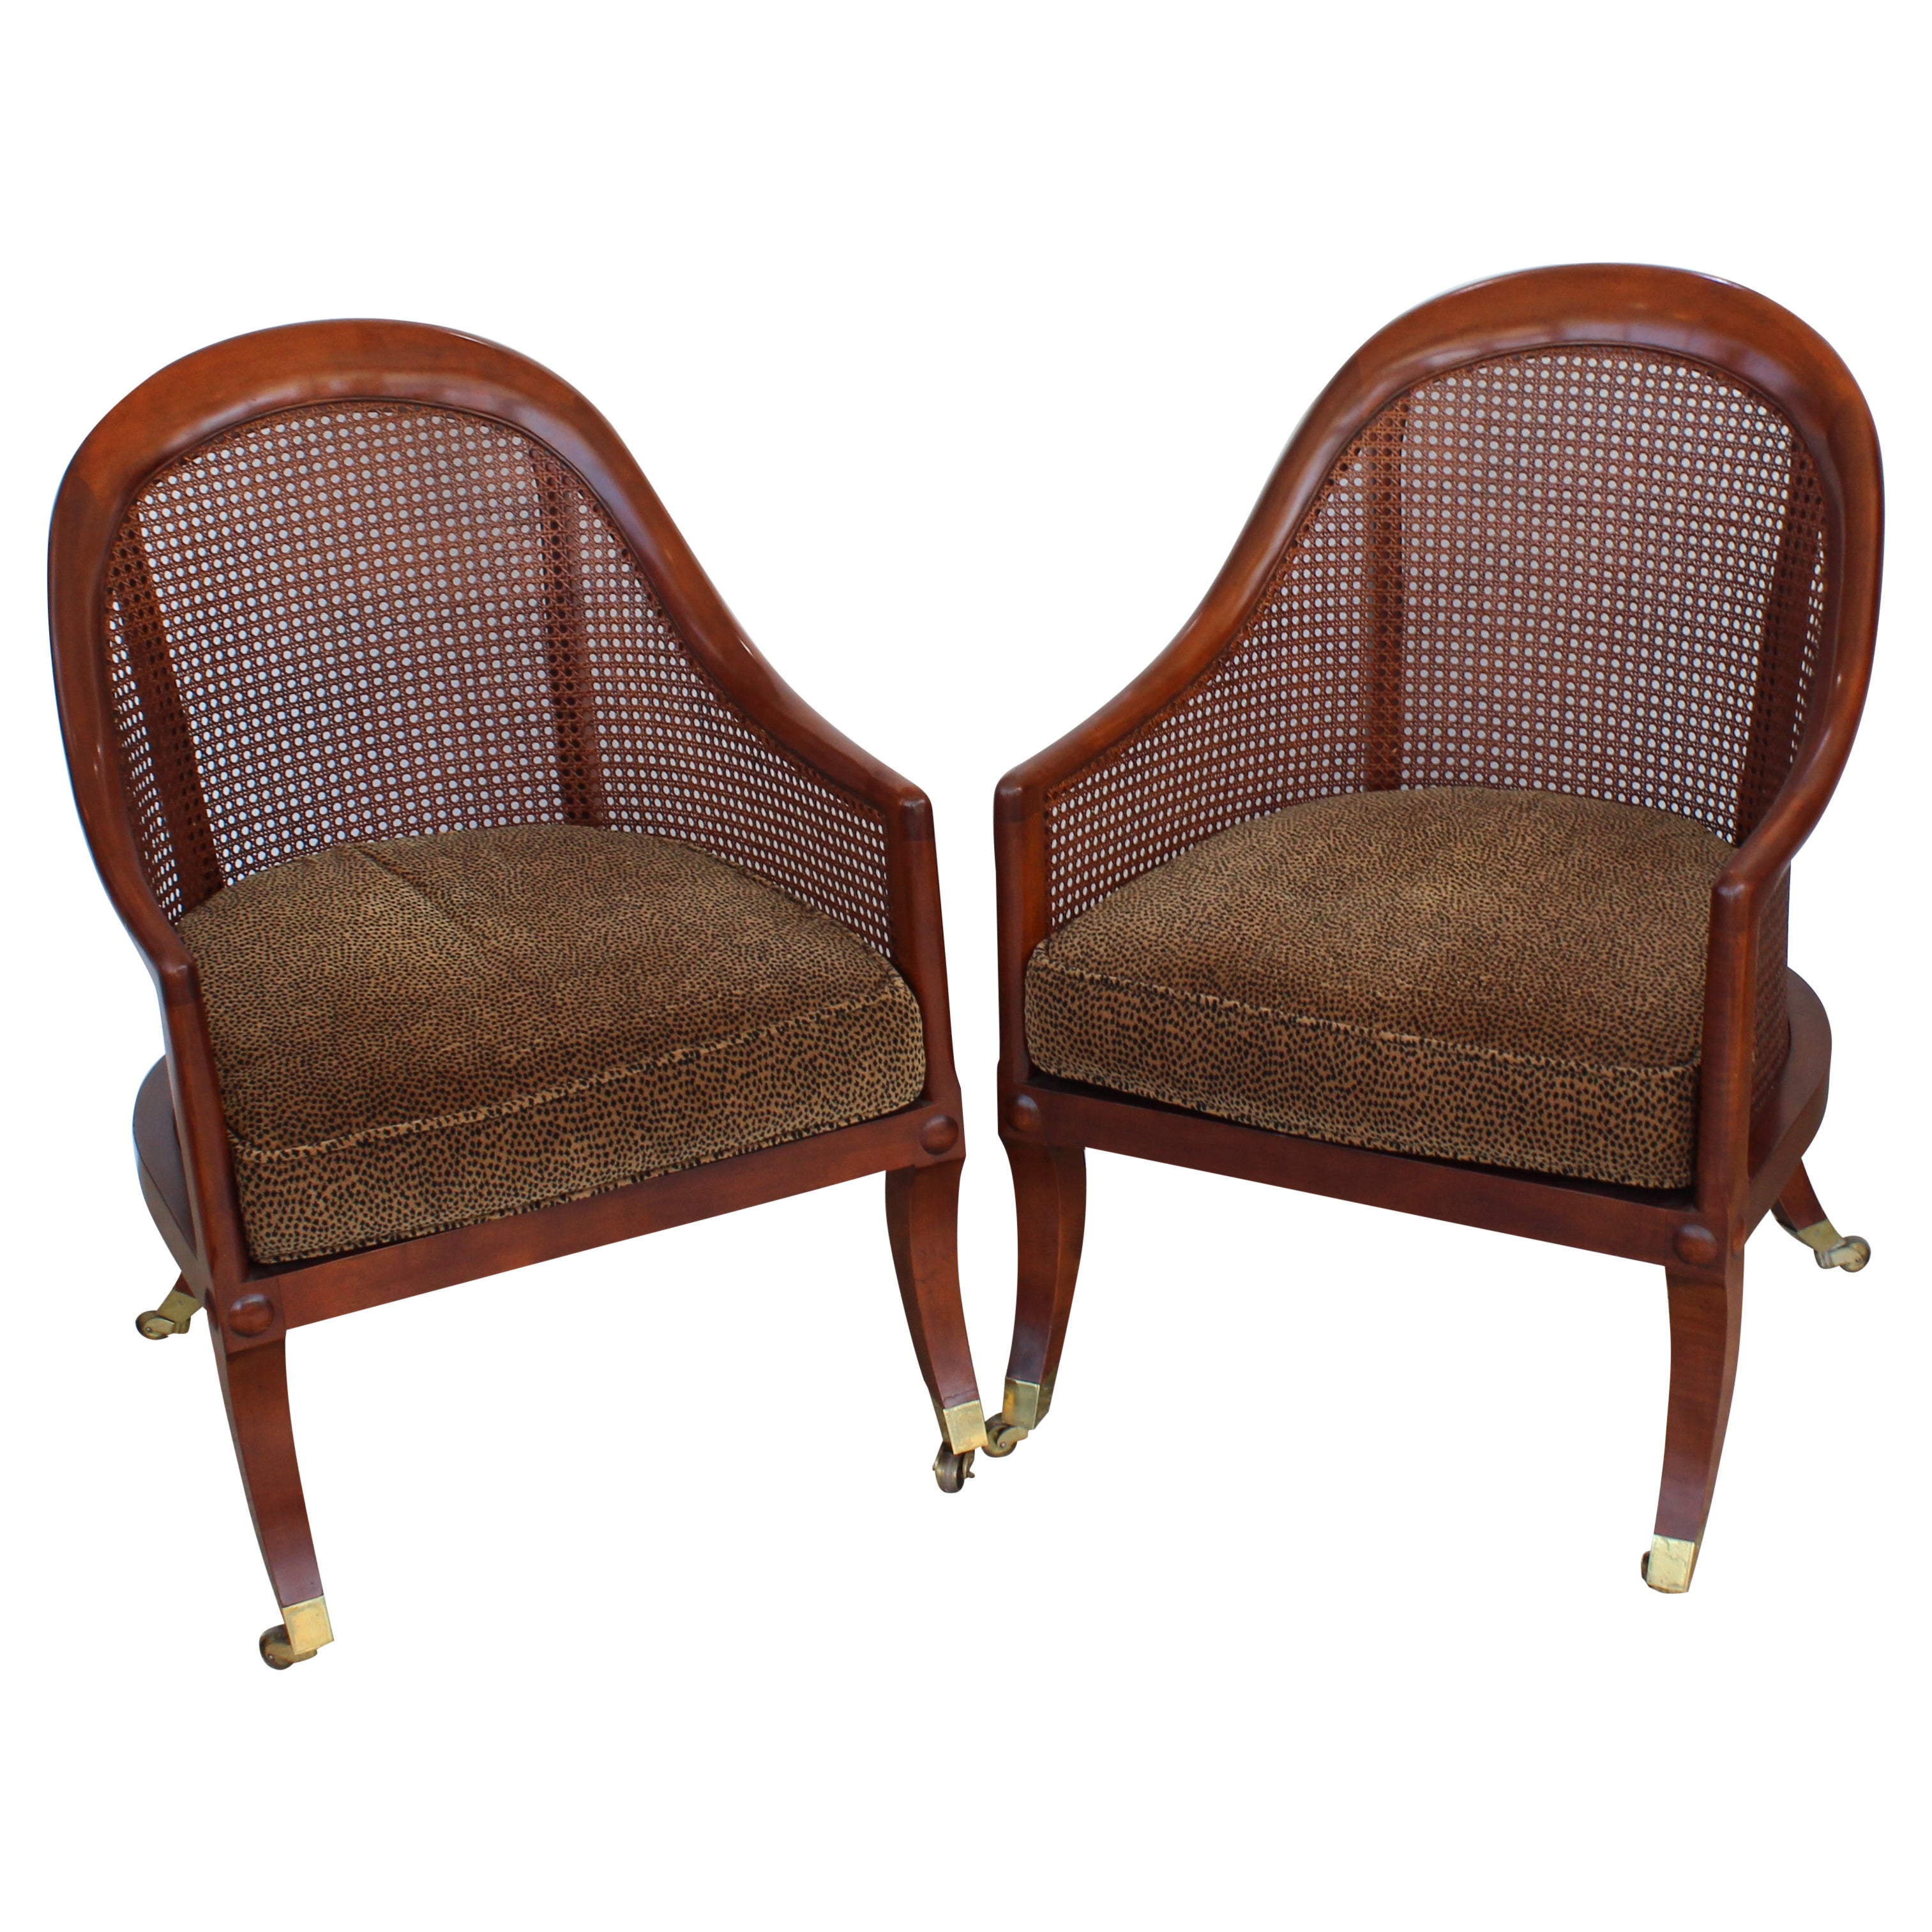 Pair of Regency Style Chairs by Baker